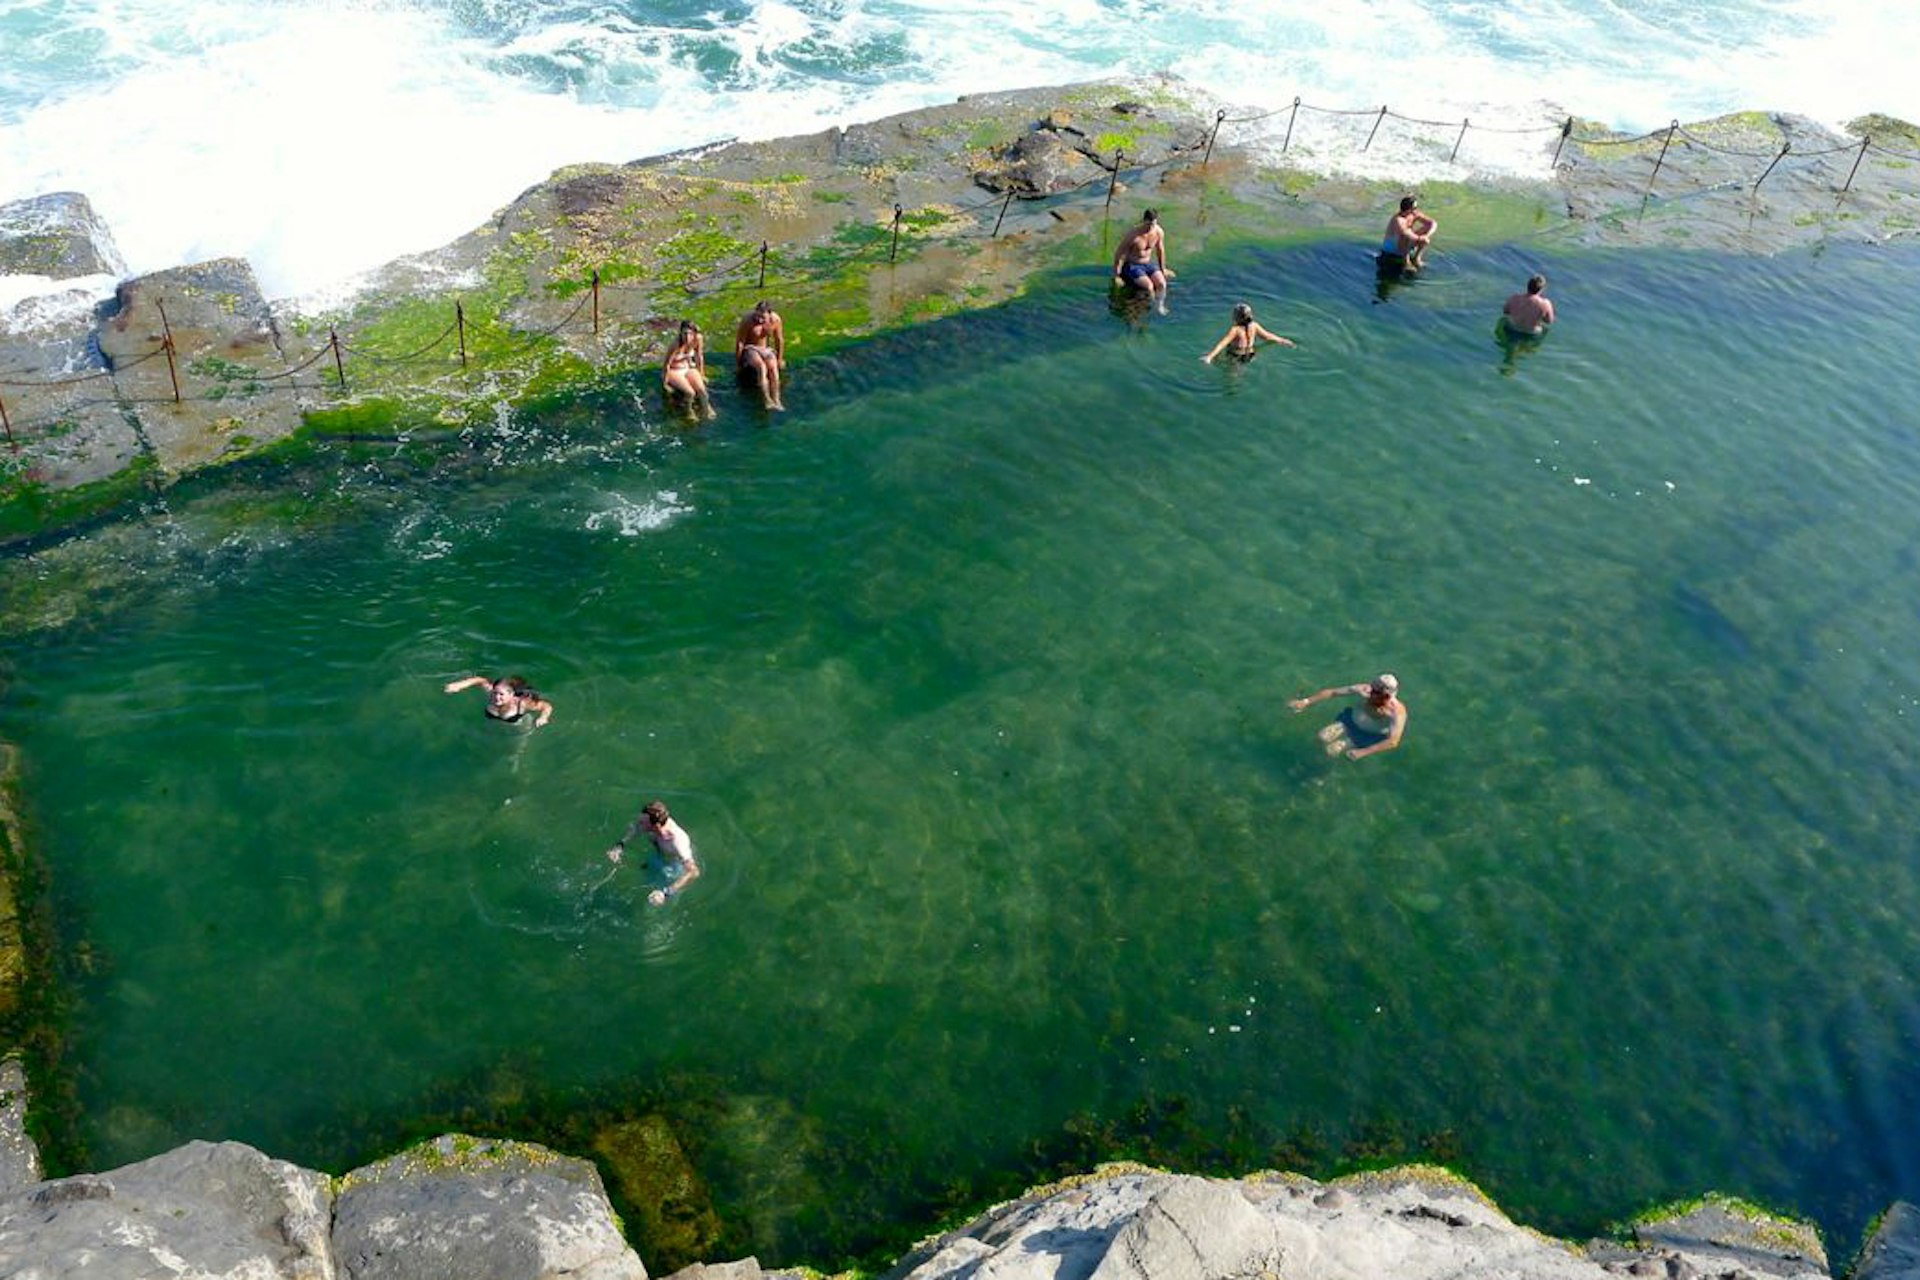 Newcastle's ocean pool is the place for a morning dip. Image by Benedict Walker / Lonely Planet